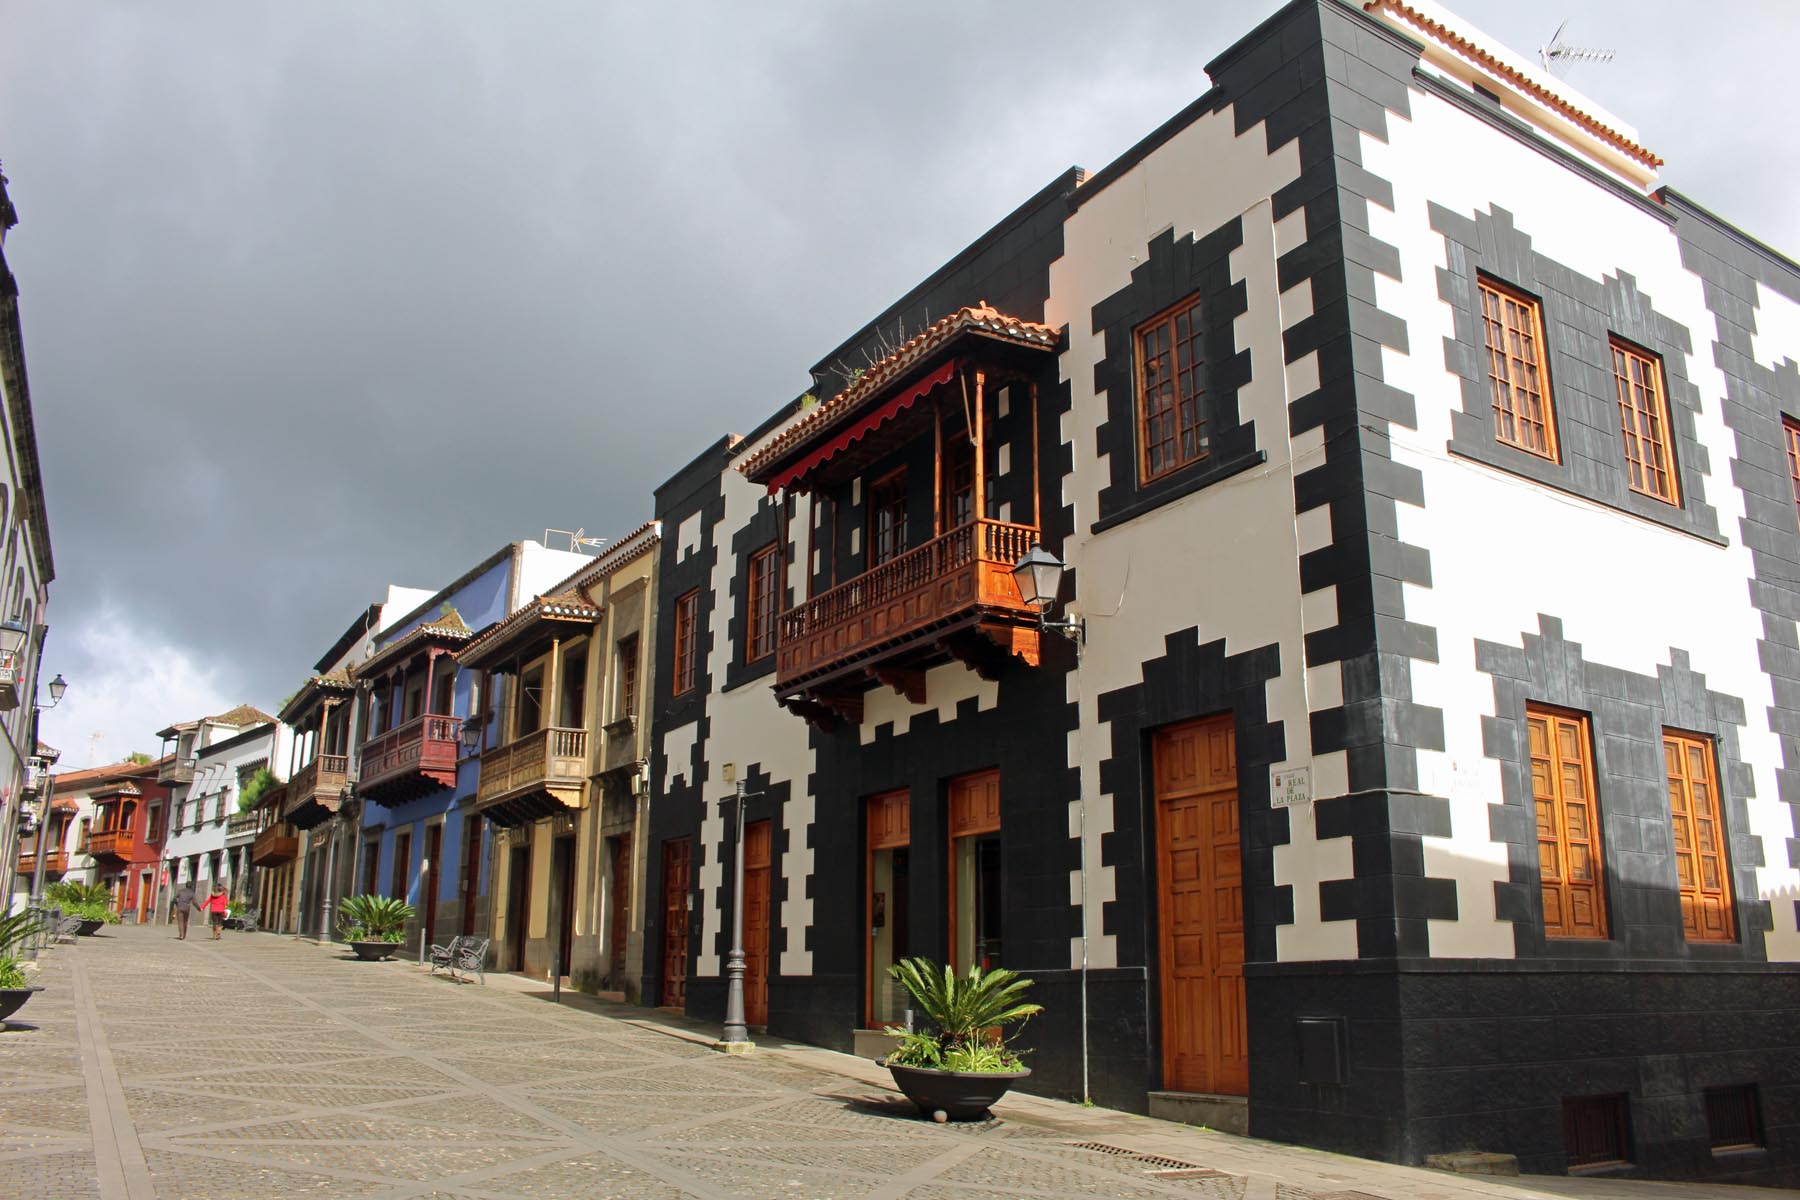 Grande Canarie, Teror, calle Real, maisons